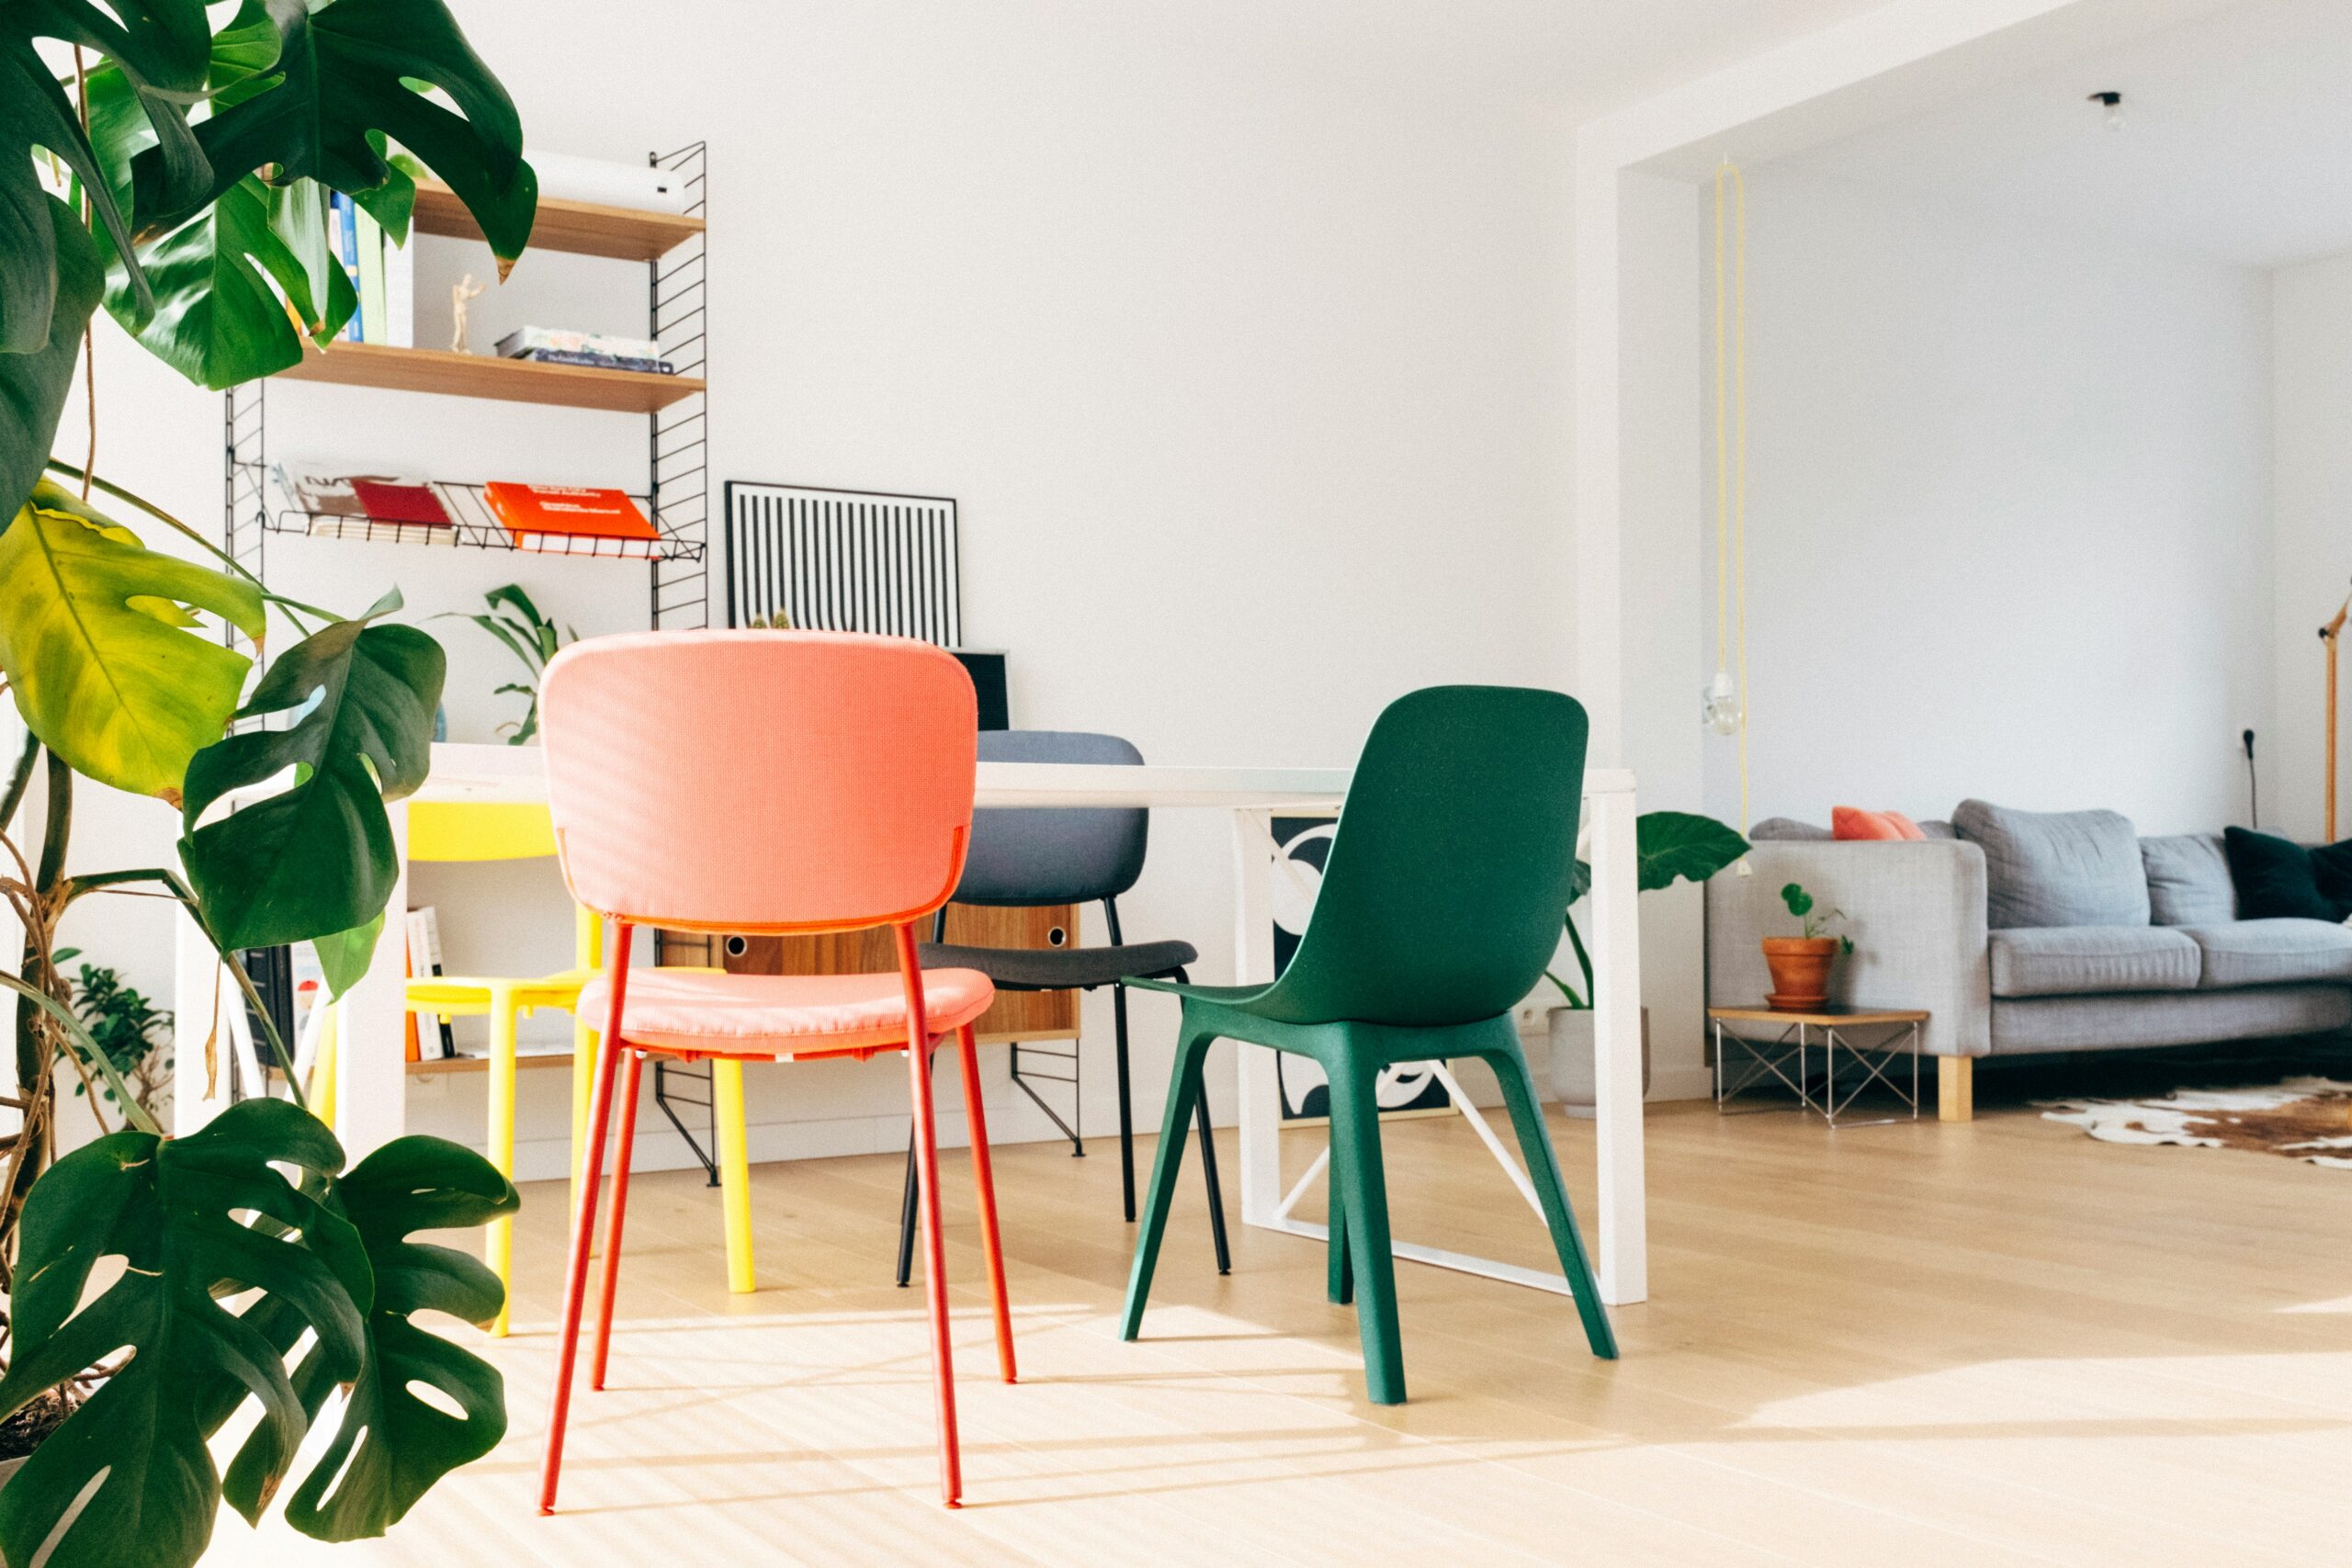 There are many benefits to including a triadic color scheme in your home. Increased energy, calmness and relaxation are just a few. Pictured: A room with chairs in the triadic color scheme.